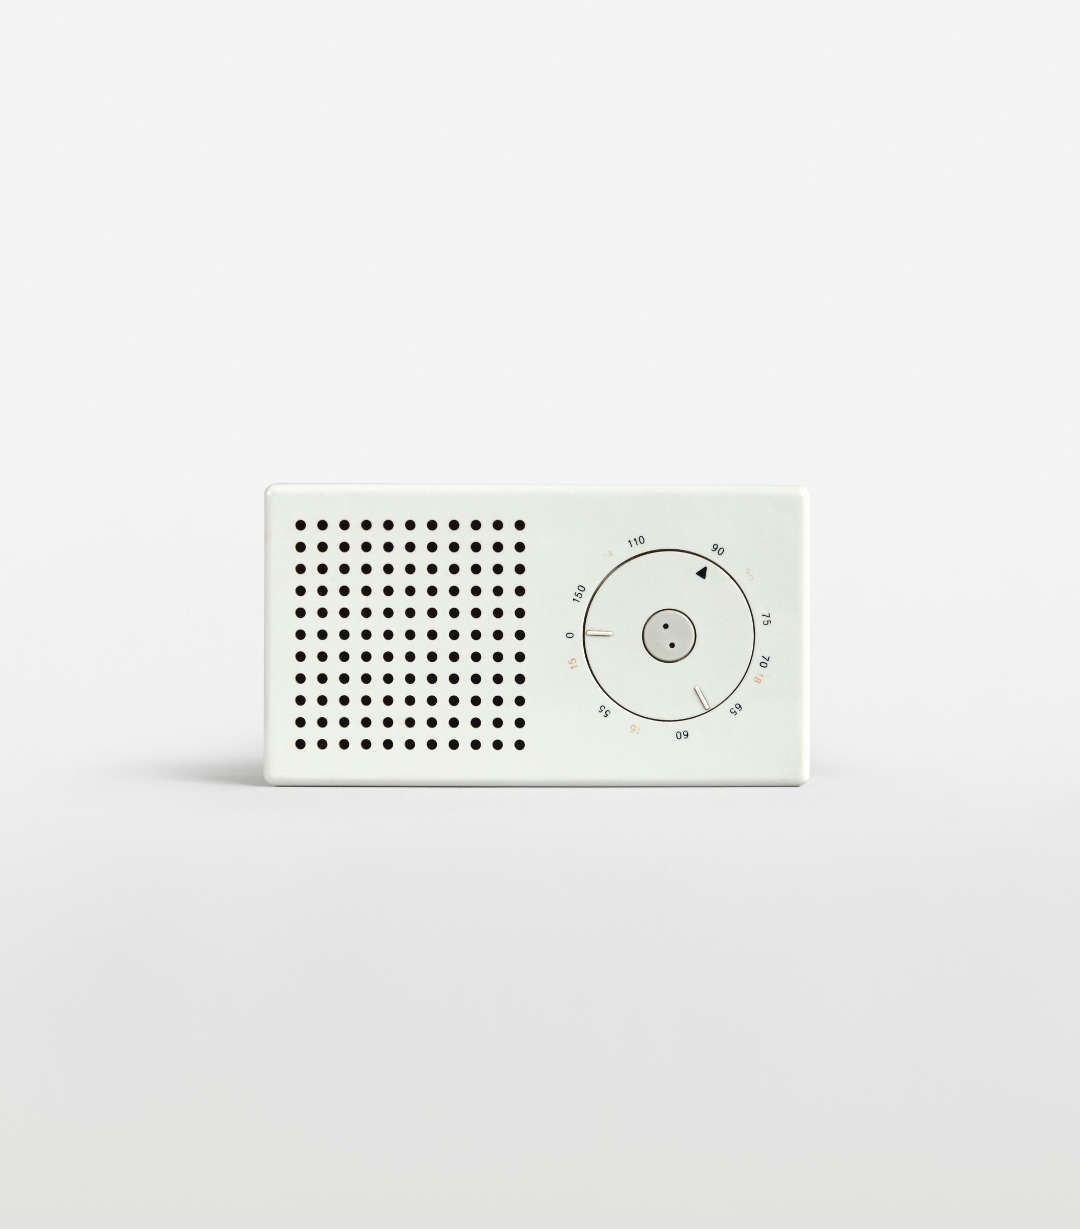 T 3, 1958, Pocket radio, Dieter Rams, HfG Ulm, Braun. 8.2 × 18.8 × 4 cm (3¼ × 7½ × 1½ in) 0.45 kg (1 lb), plastic, DM 120. photography Andreas Kugel / © copyright Dieter Rams Archive. As featured in Dieter Rams: The Complete Works